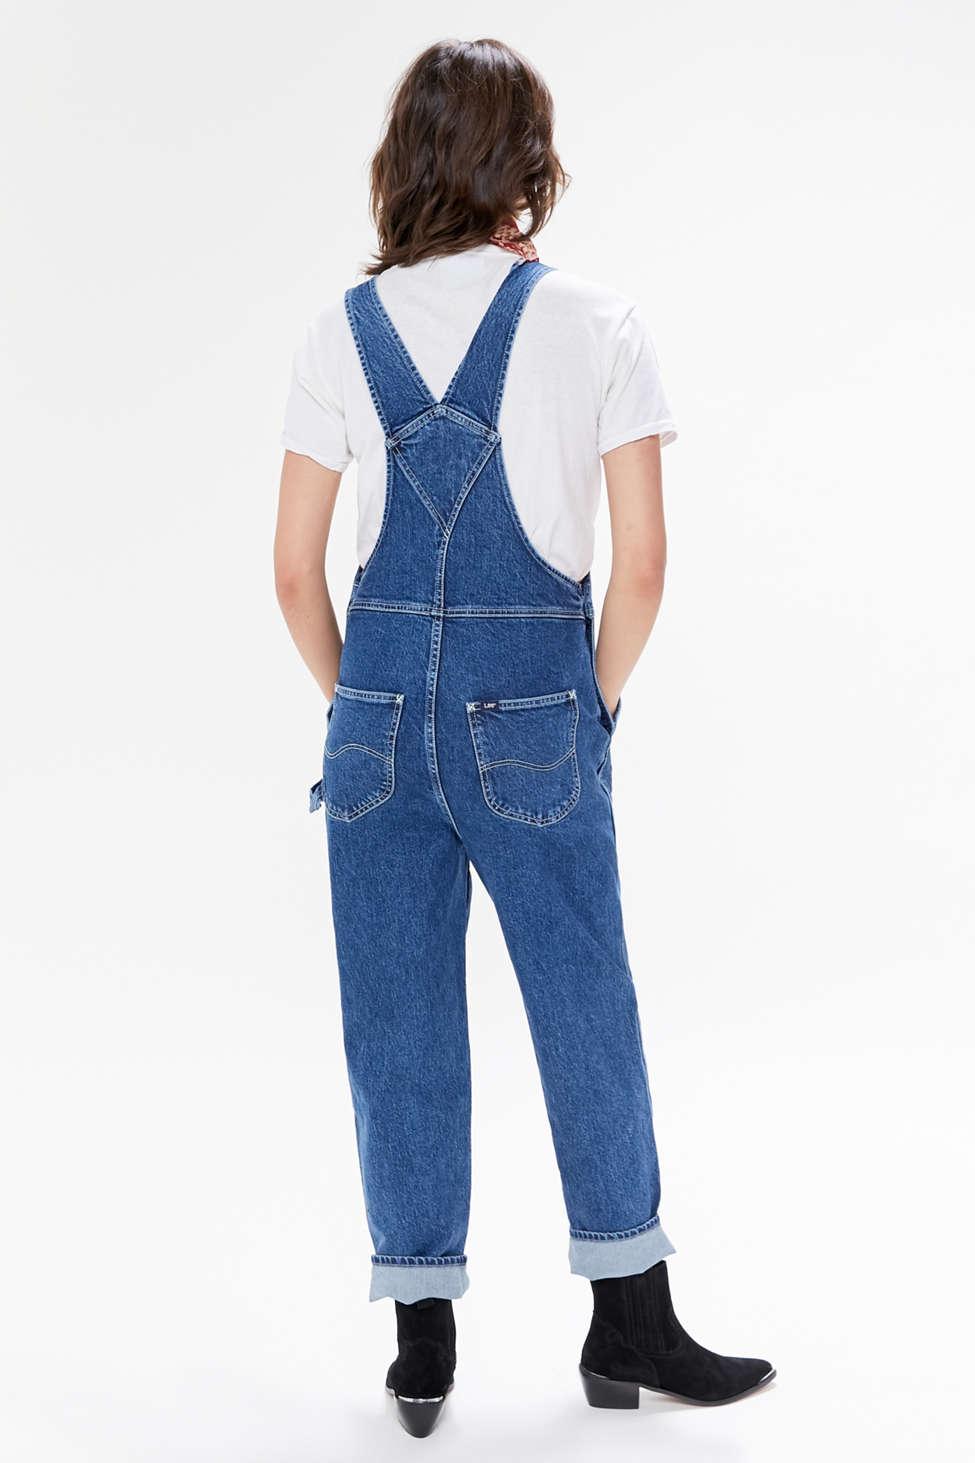 Lee Jeans Uo Exclusive Denim Overall in Blue | Lyst